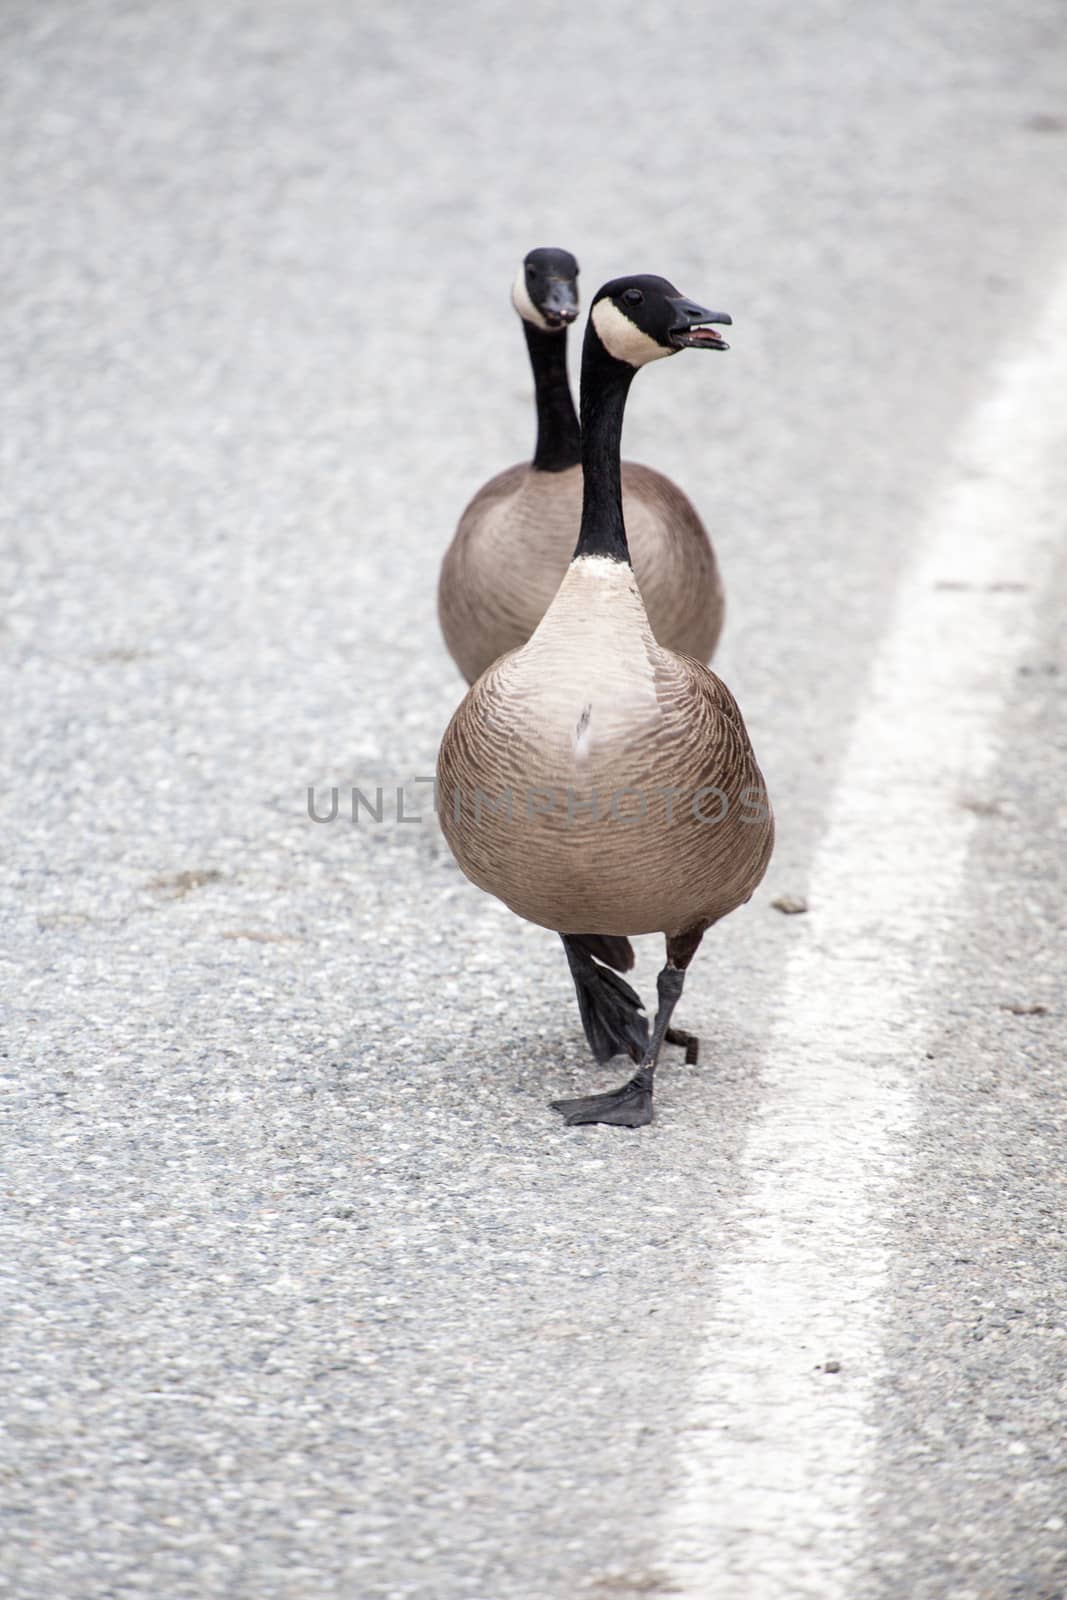 Two Canadian geese walk along a white line